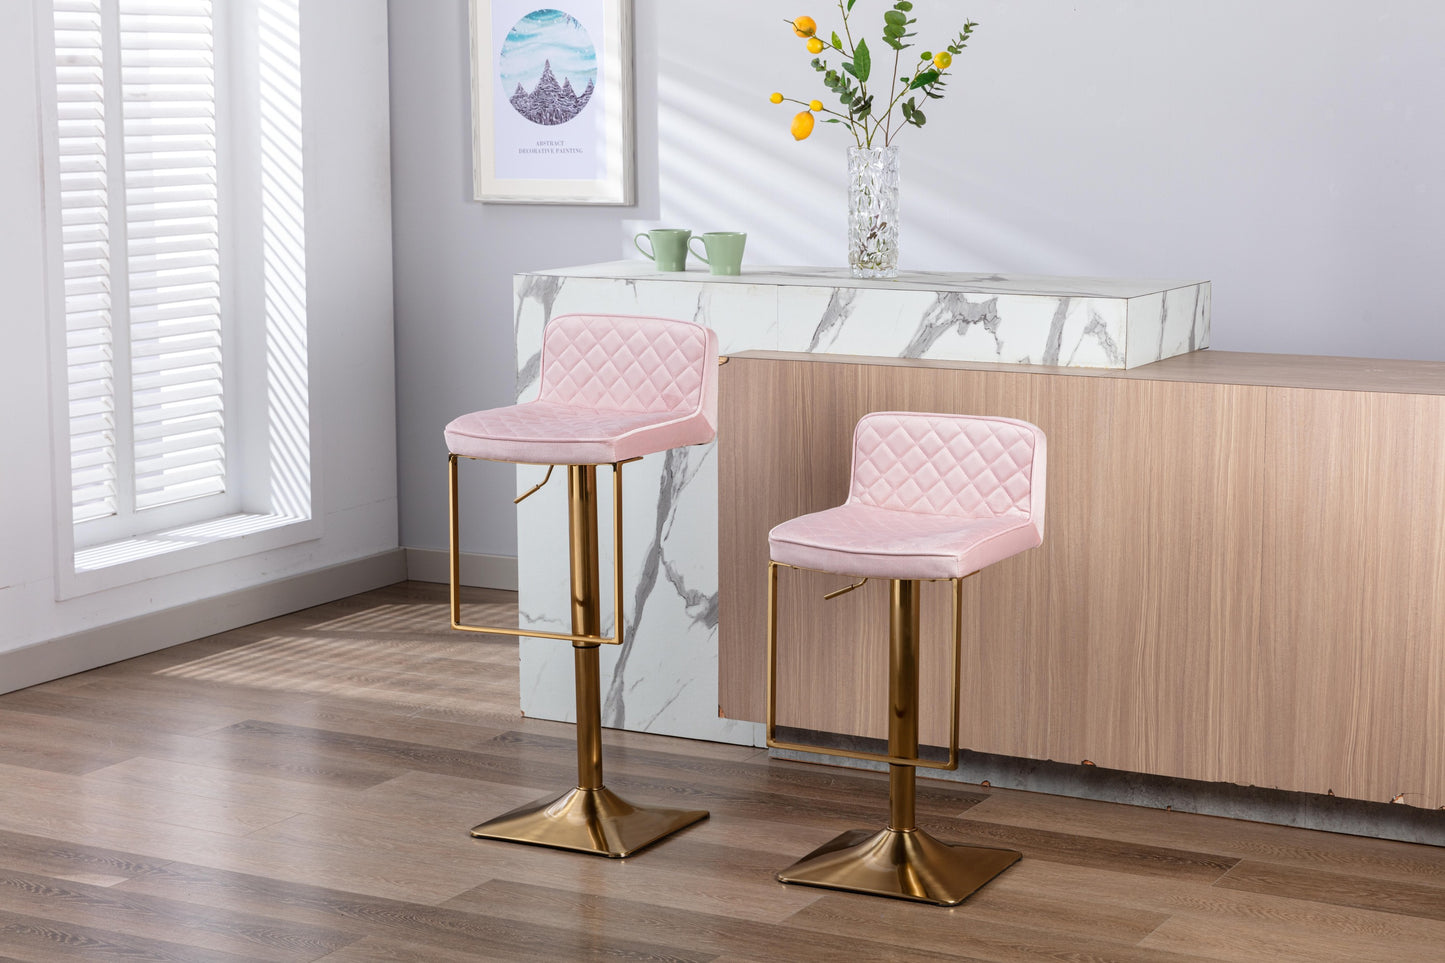 Bar Stools - Swivel Barstool Chairs with Back, Modern Pub Kitchen Counter Height, velvet, (1pc/ctn)